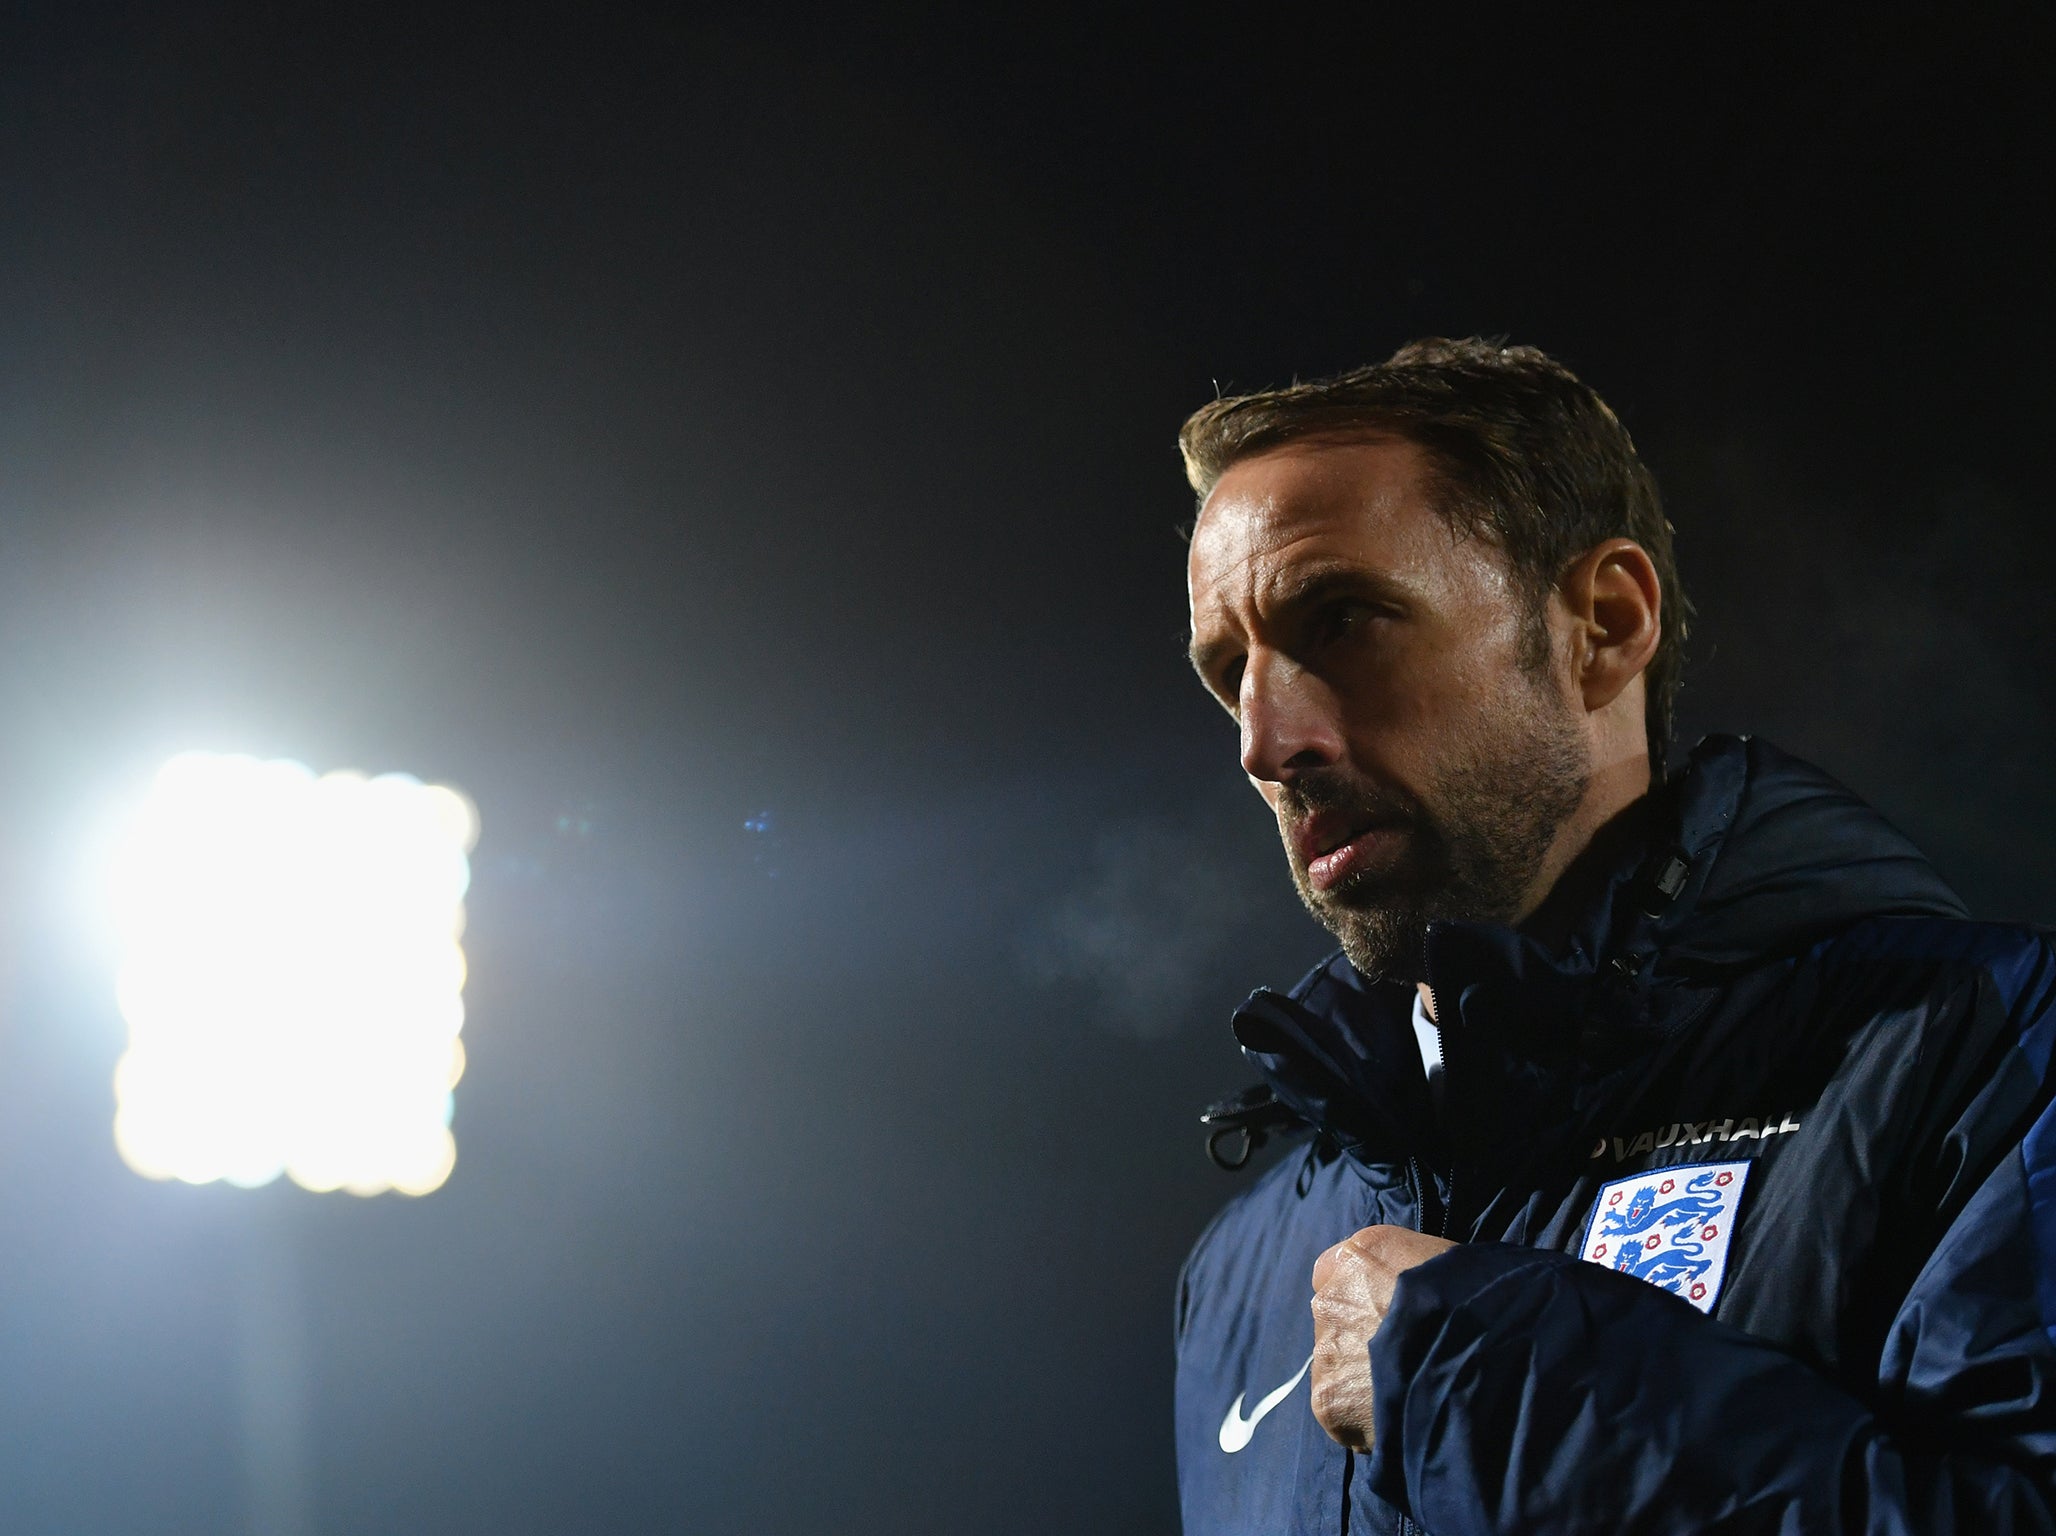 Southgate admitted it has not been the best week for England